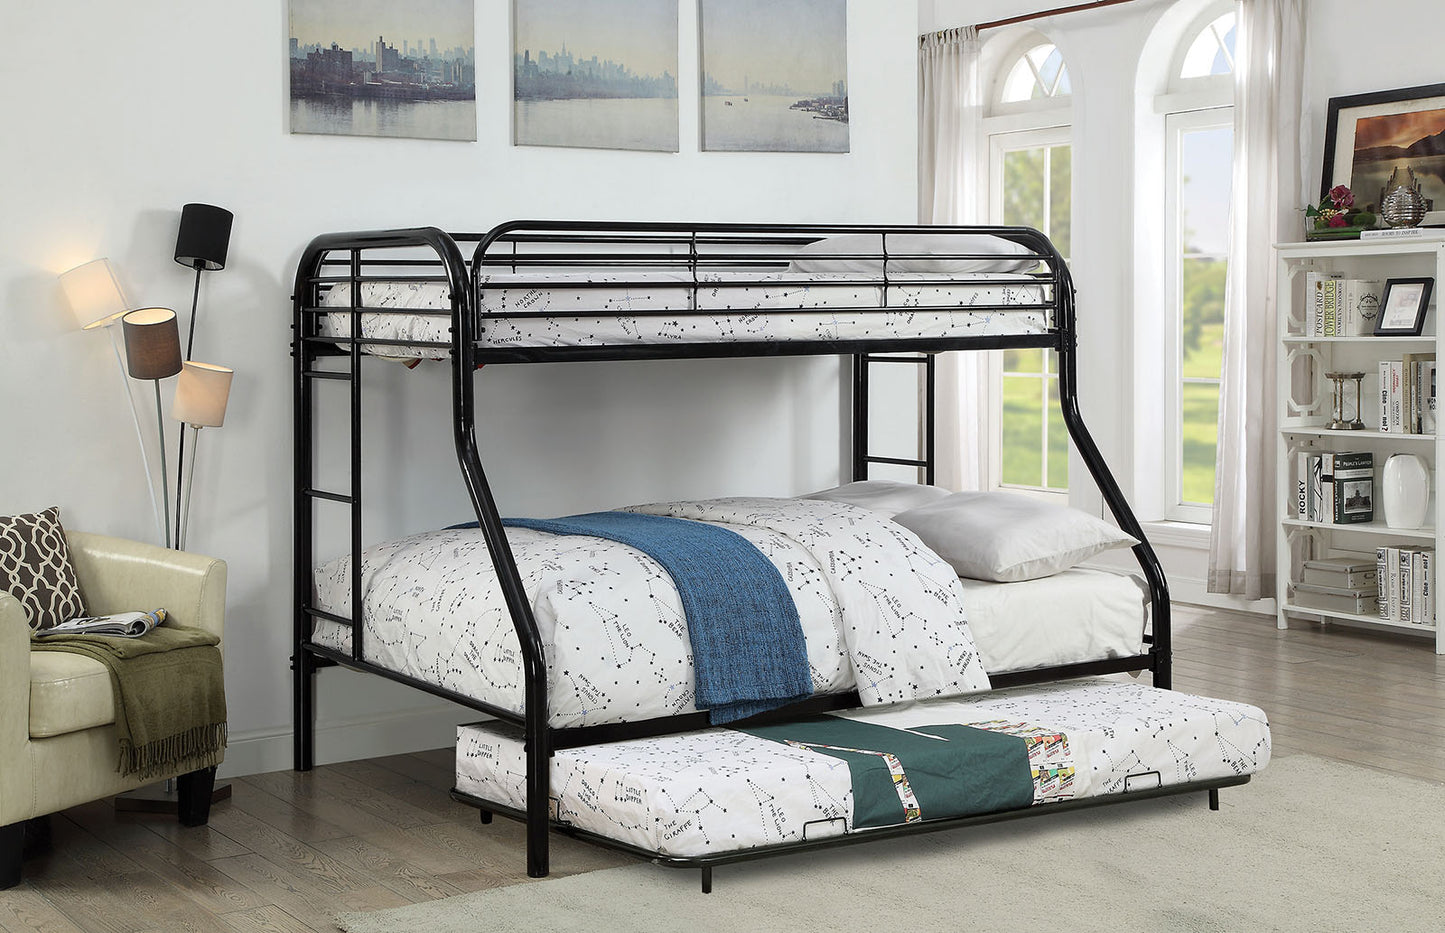 Opal Black Twin/Full Bunk Bed image